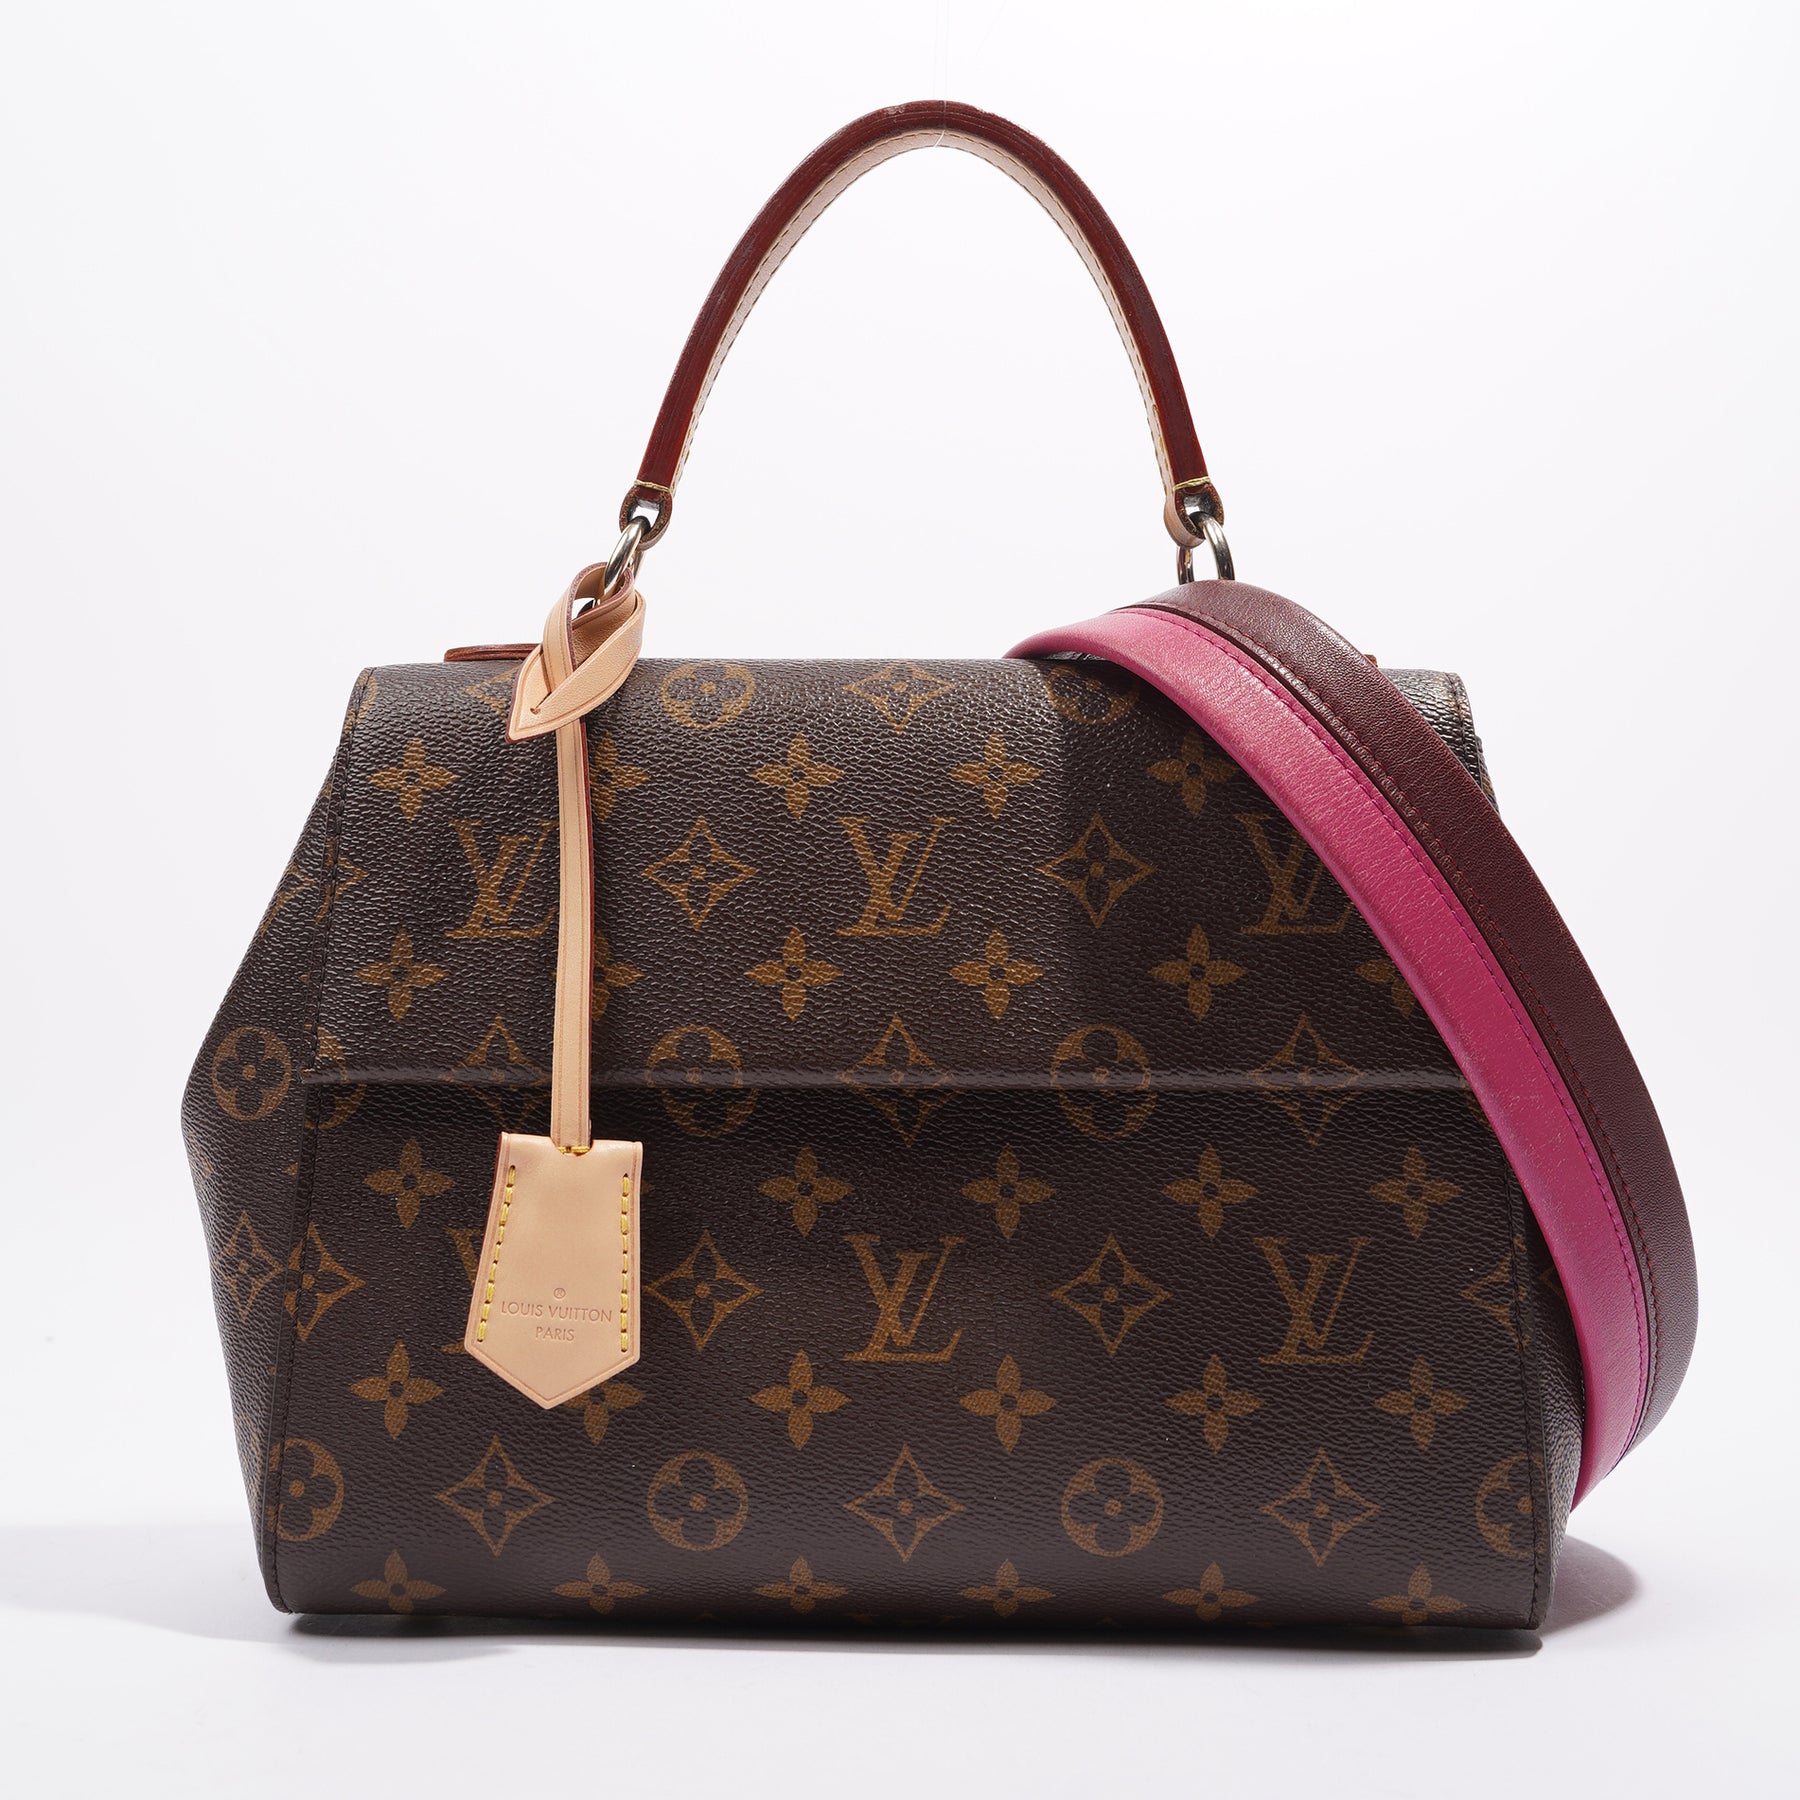 March Madness - Share your LV purchases here!  Louis vuitton, Louis vuitton  neonoe, Louis vuitton bag outfit